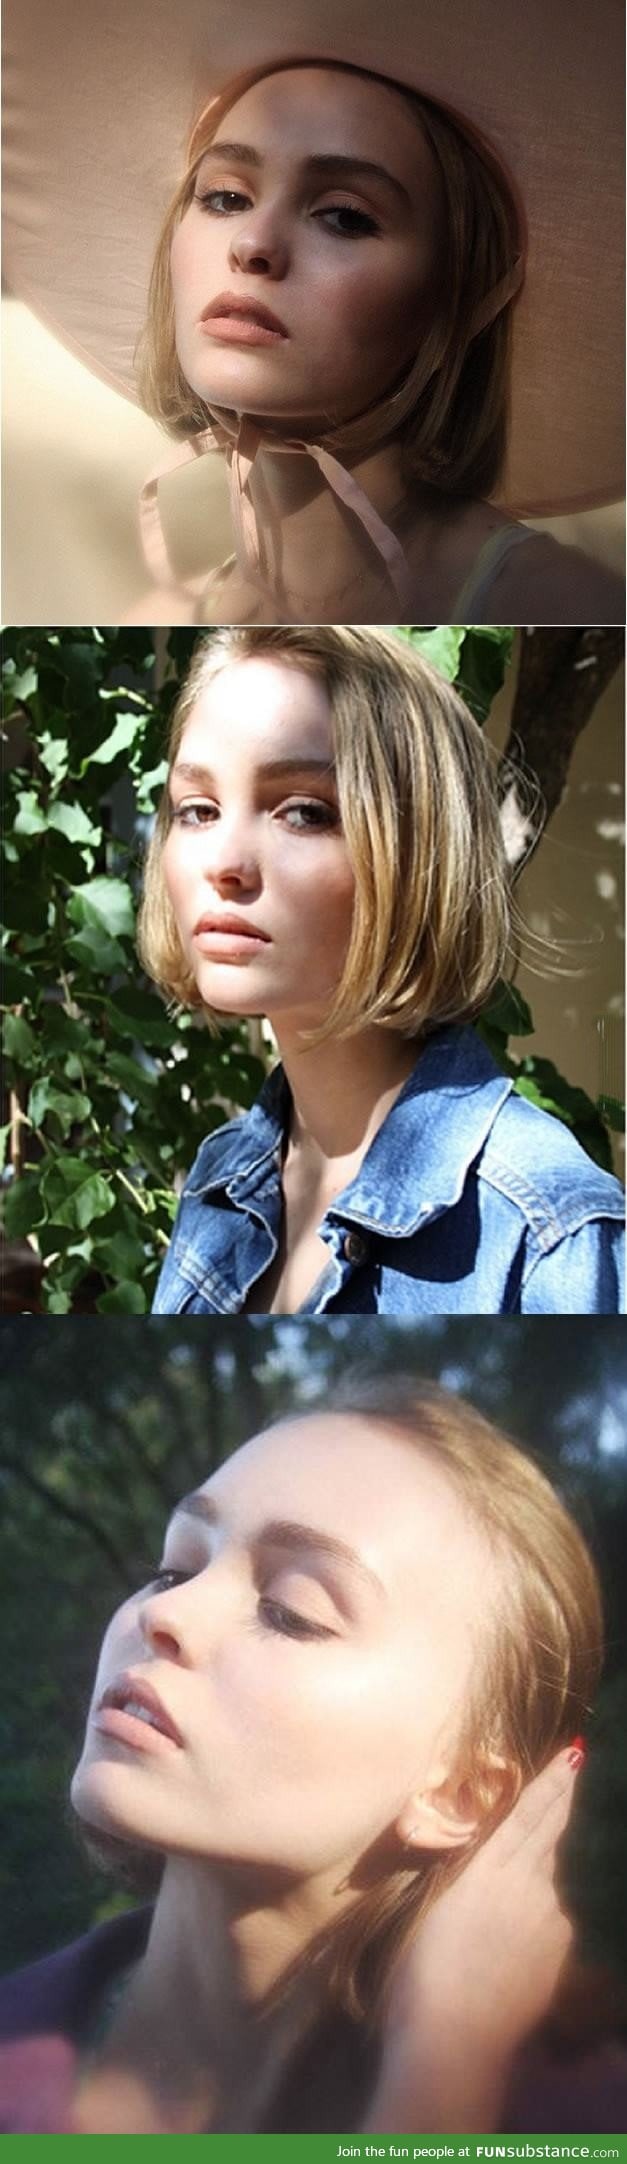 This is Johnny Depp's daughter